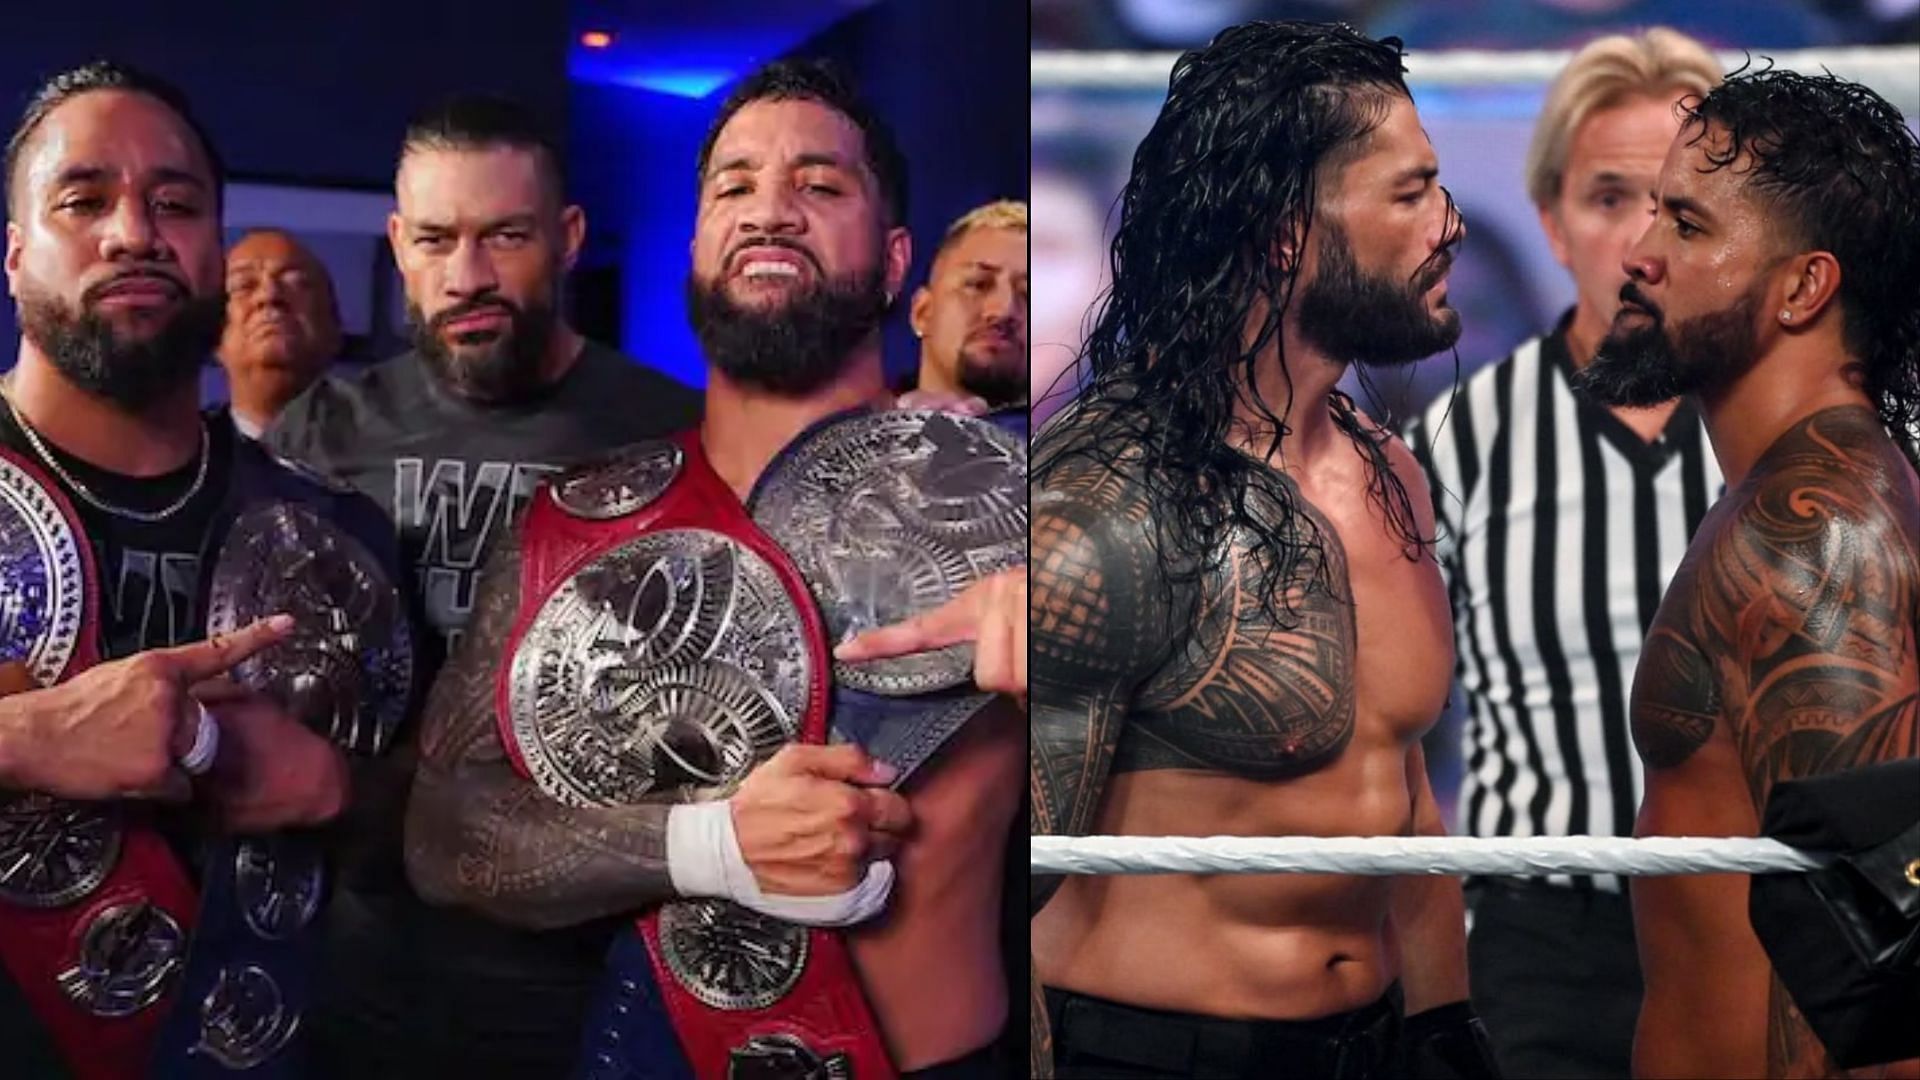 Remaining members of The Bloodline (left); Roman Reigns and Jey Uso from 2020 (right)